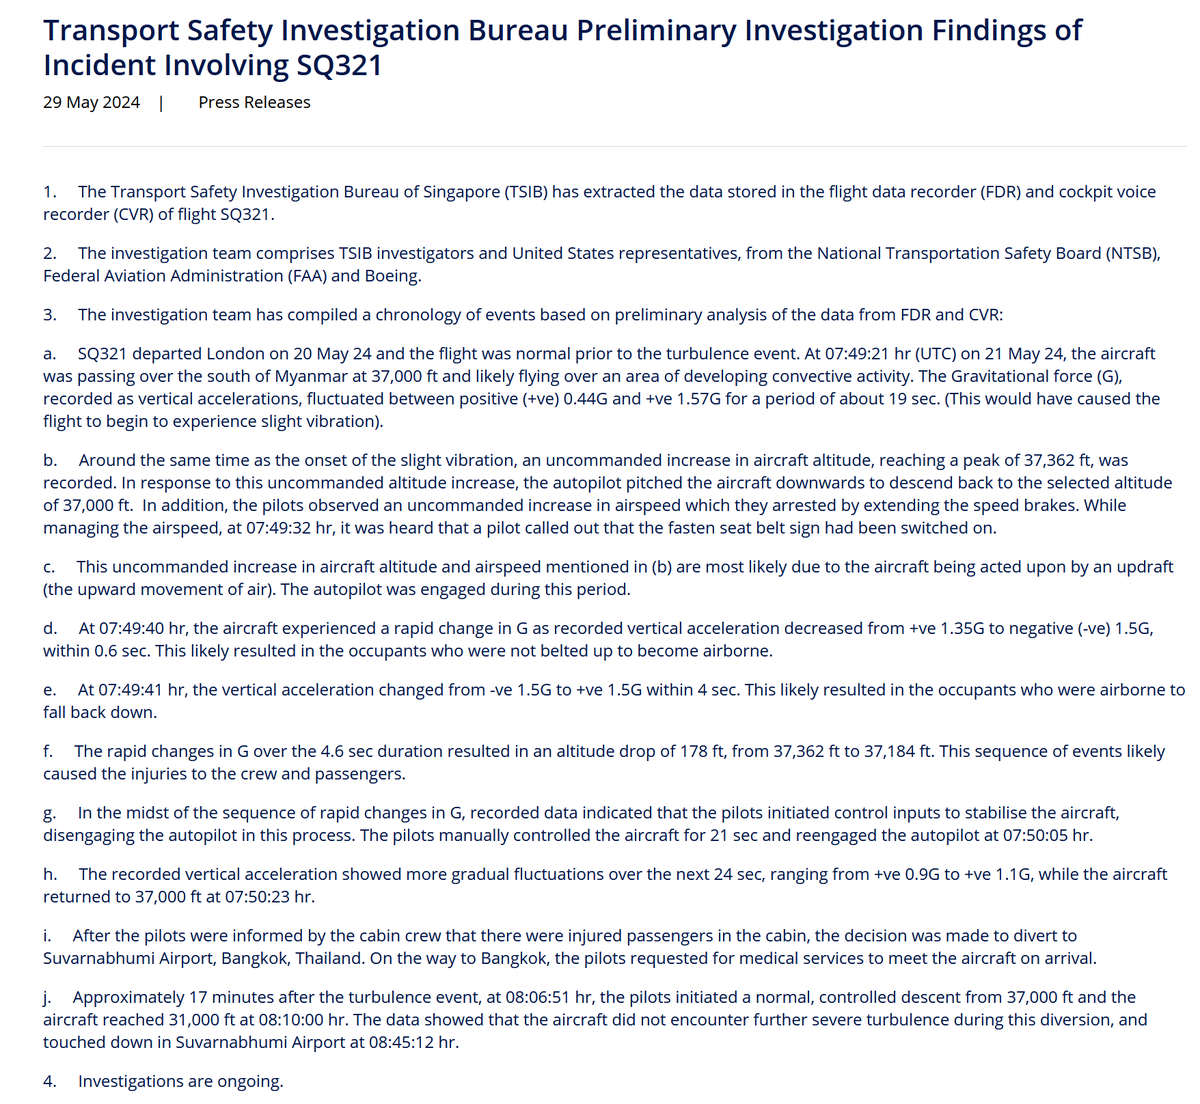 The Singapore Transport Safety Investigation Bureau (TSIB) published their preliminary investigation findings on the turbulence accident involving Singapore Airlines flight #SQ321
mot.gov.sg/news/details/t…